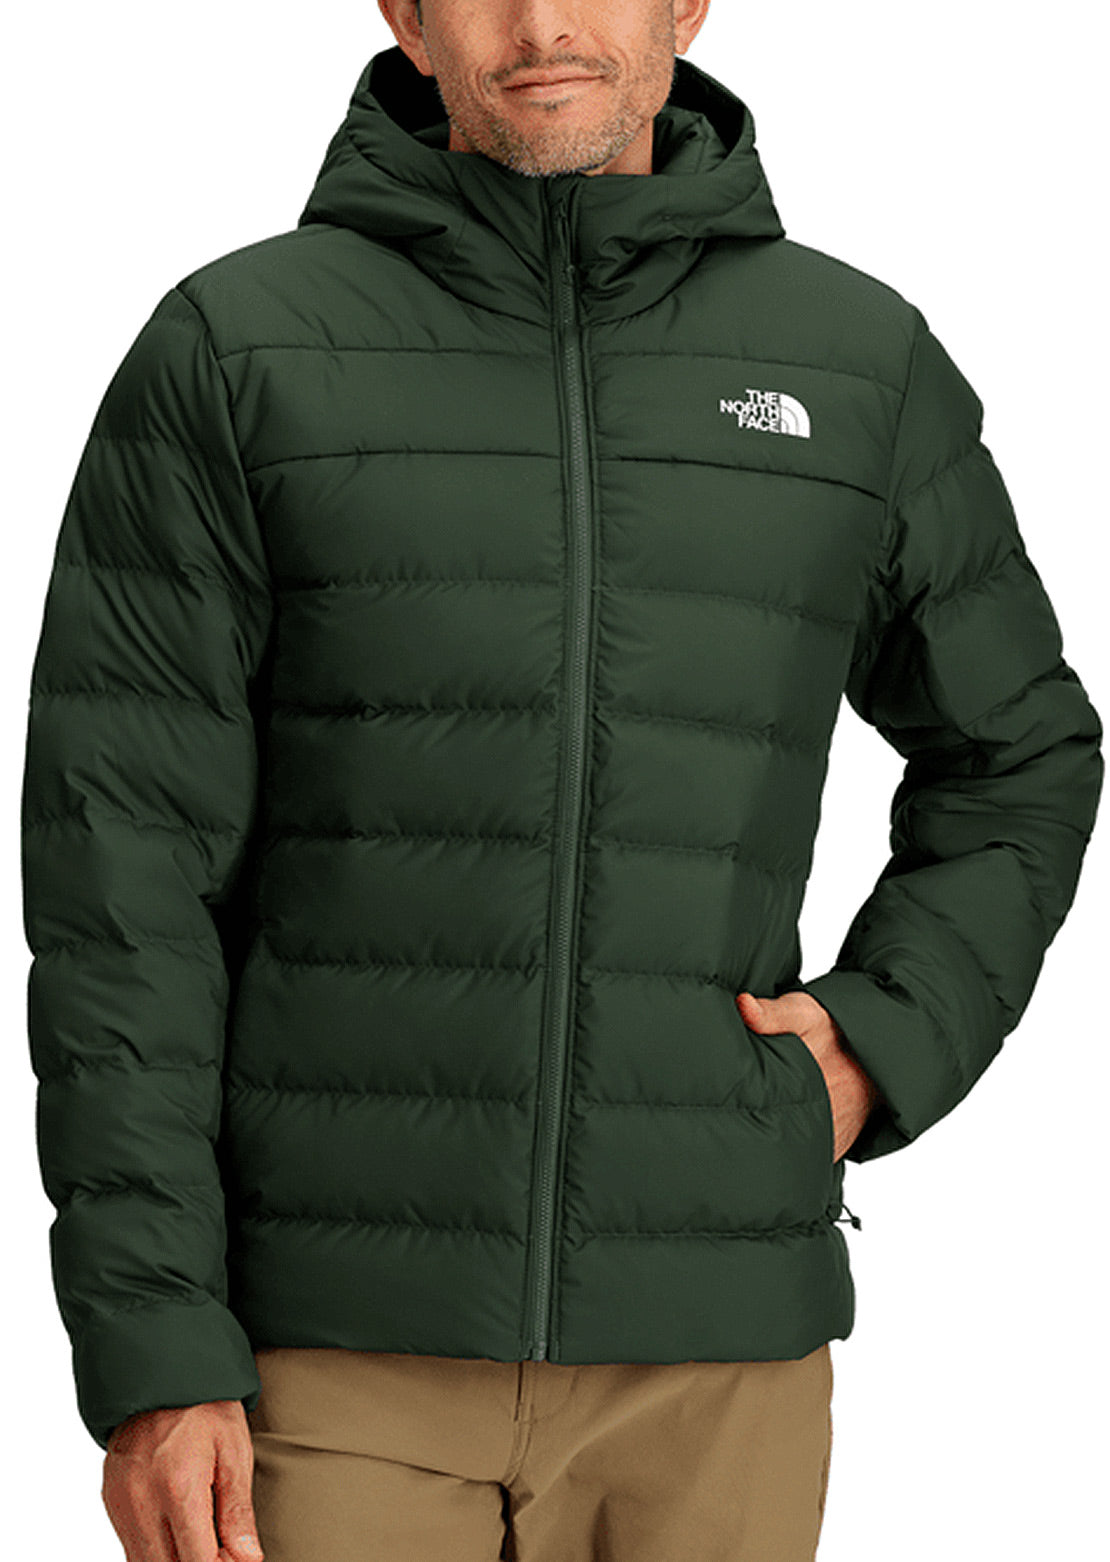 THE NORTH FACE◇ACONCAGUA HOODIE JACKET_アコンカグアフーディ